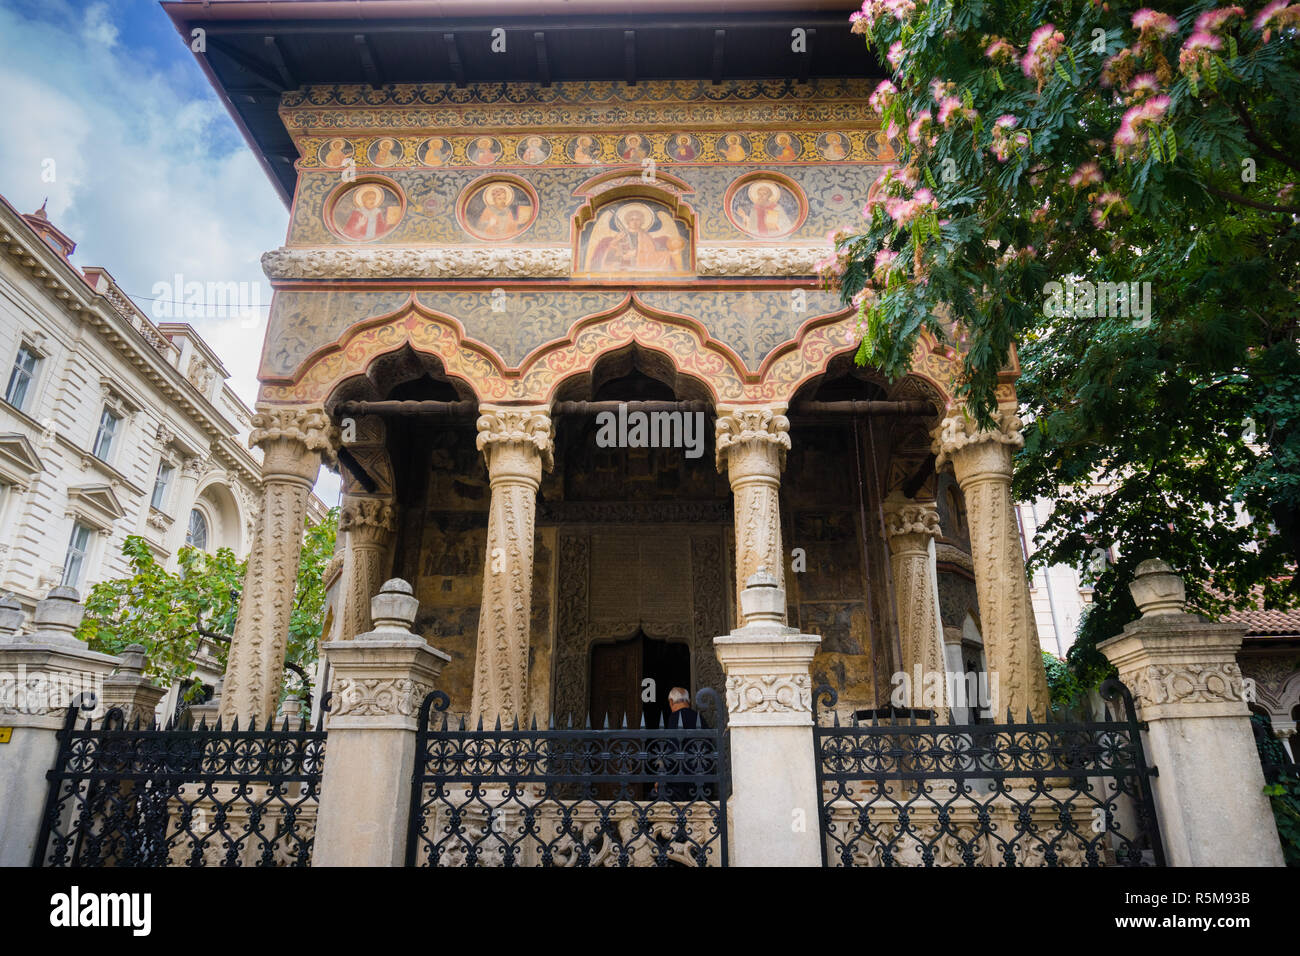 Facade of the eastern Orthodox Stavropoleos Church in the old city area of Bucharest, Romania Stock Photo